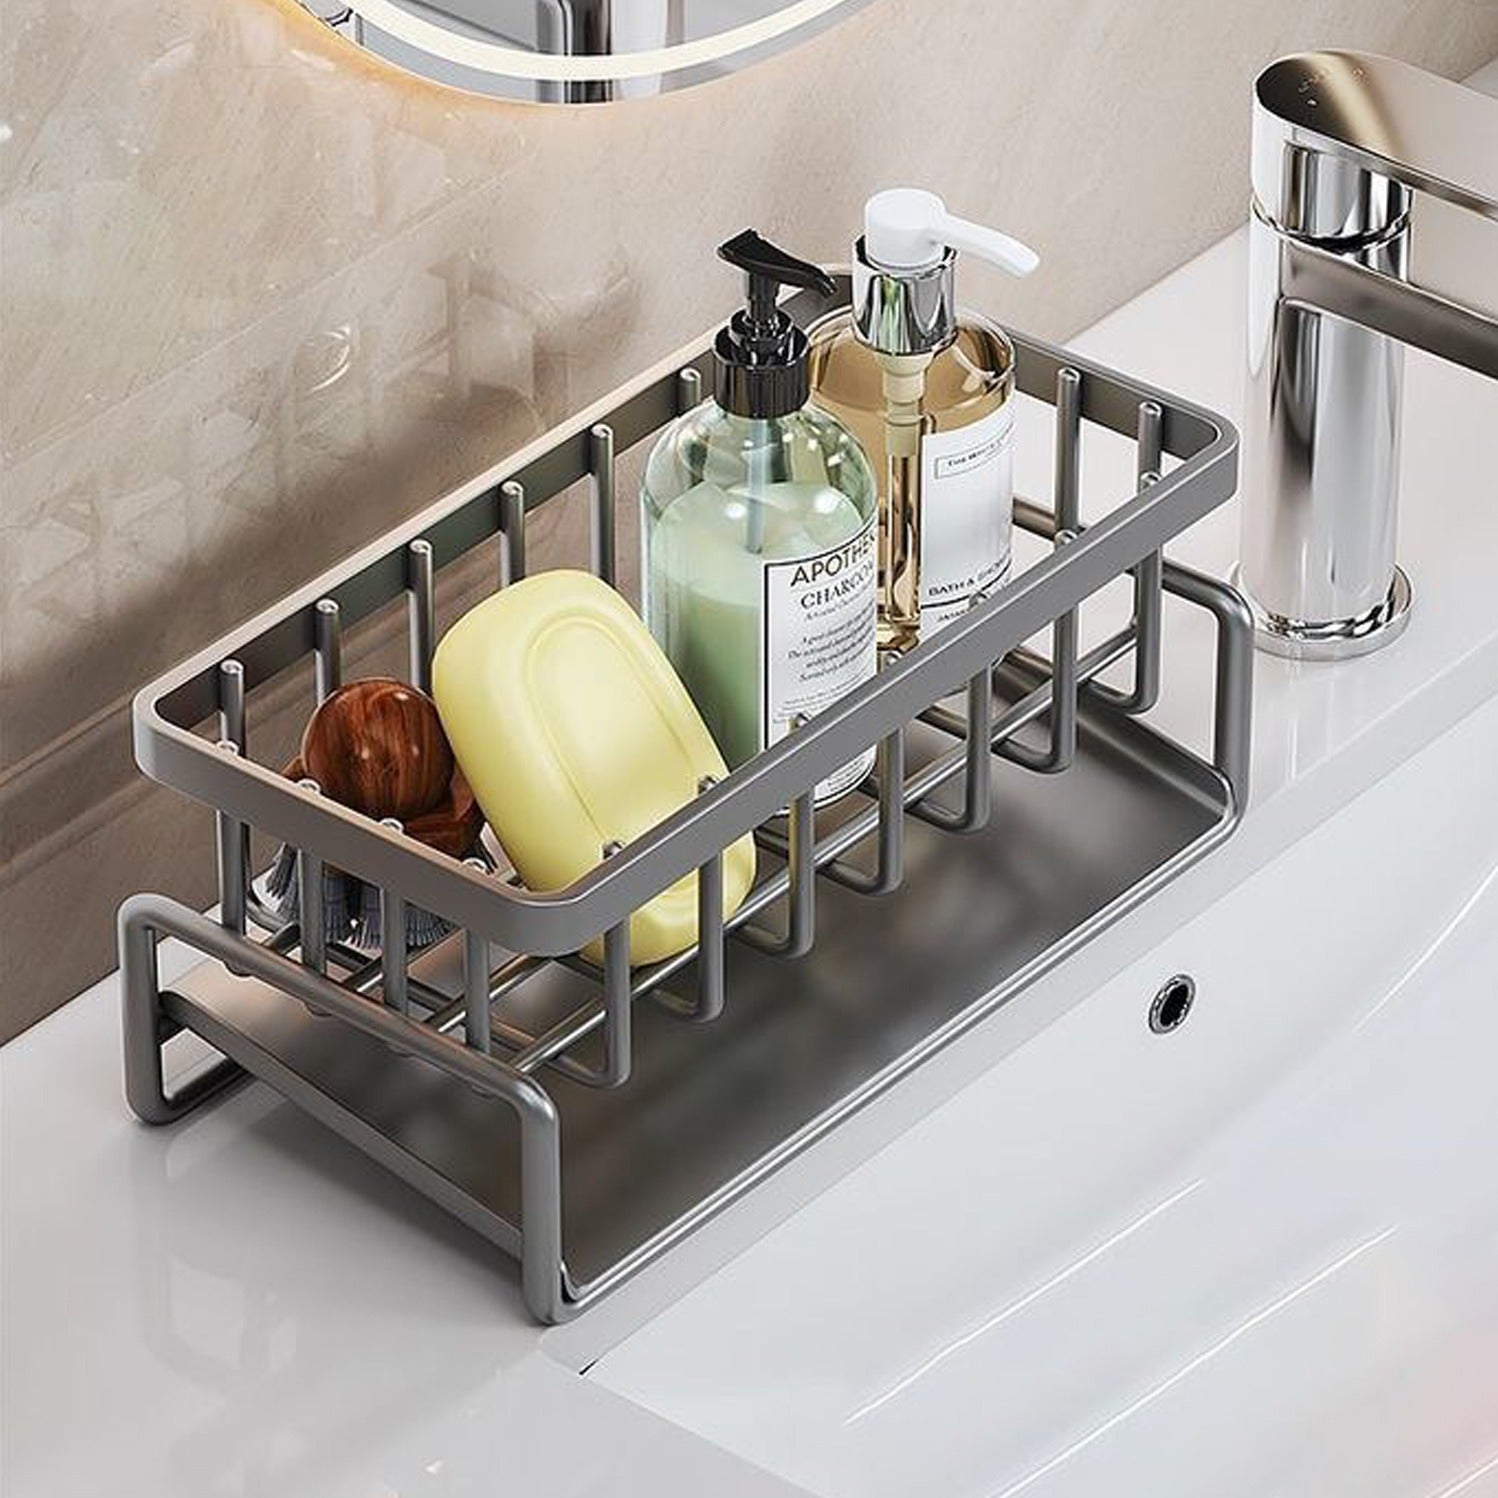 Rustproof Stainless Steel Sink Organizer Rack with some items in it